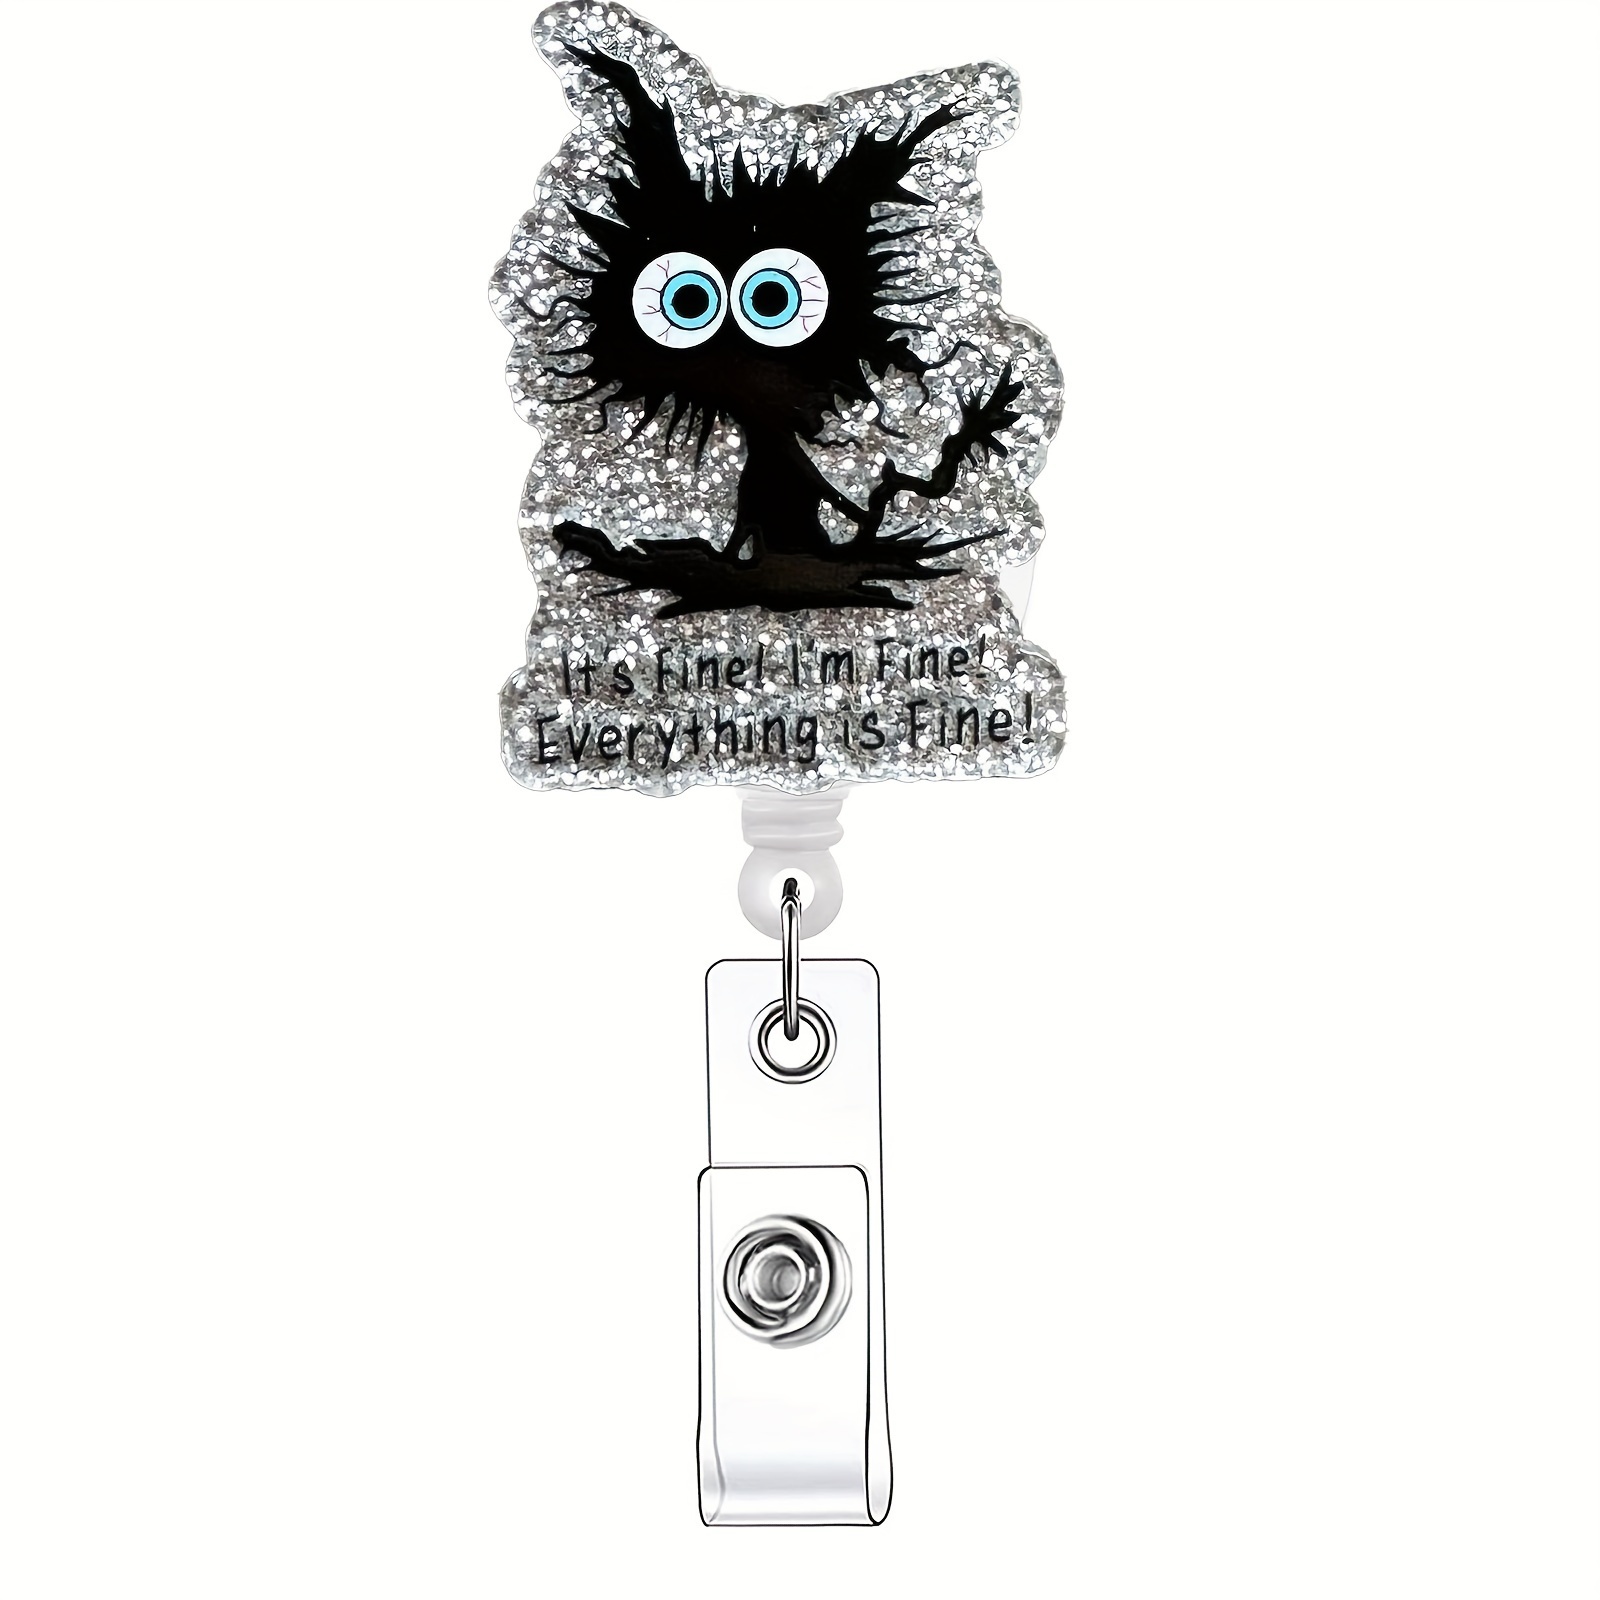 1pc Glittery I'am Fine Funny Saying Retractable Badge Reel, Acrylic Name Badge Holder with ID Clip for Nurse Doctor,Cat,Car,Gift,Office Supplies